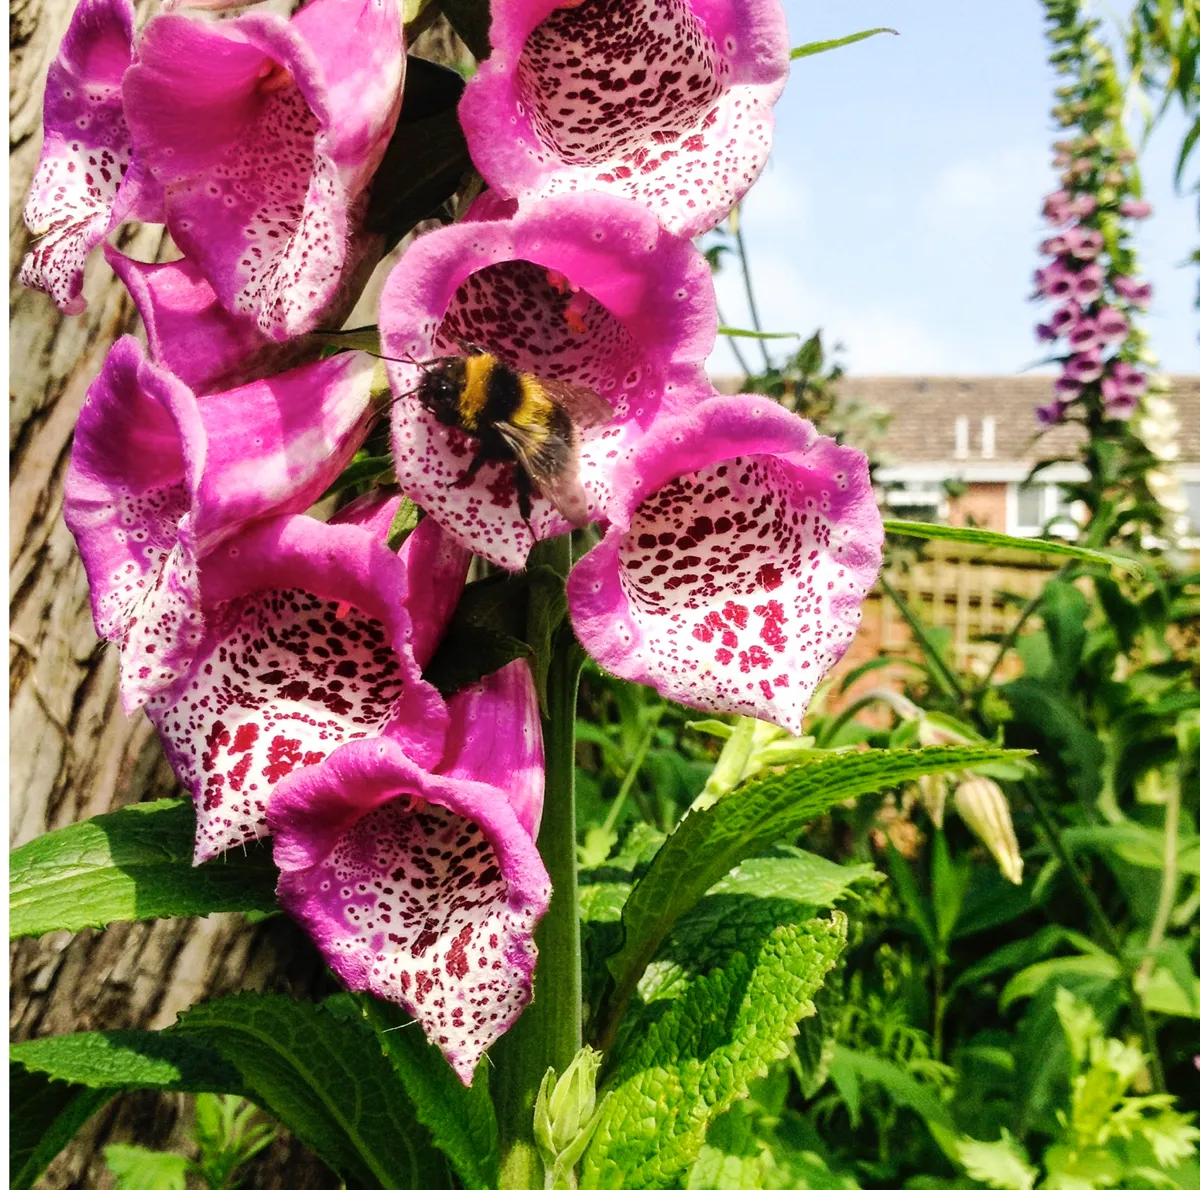 Garden bumblebee (Bombus hortorum), Suffolk by Lyn White submitted to the Great British Bee Count 2016 For use only with reference to the Great British Bee Count and Lyn White must be credited.